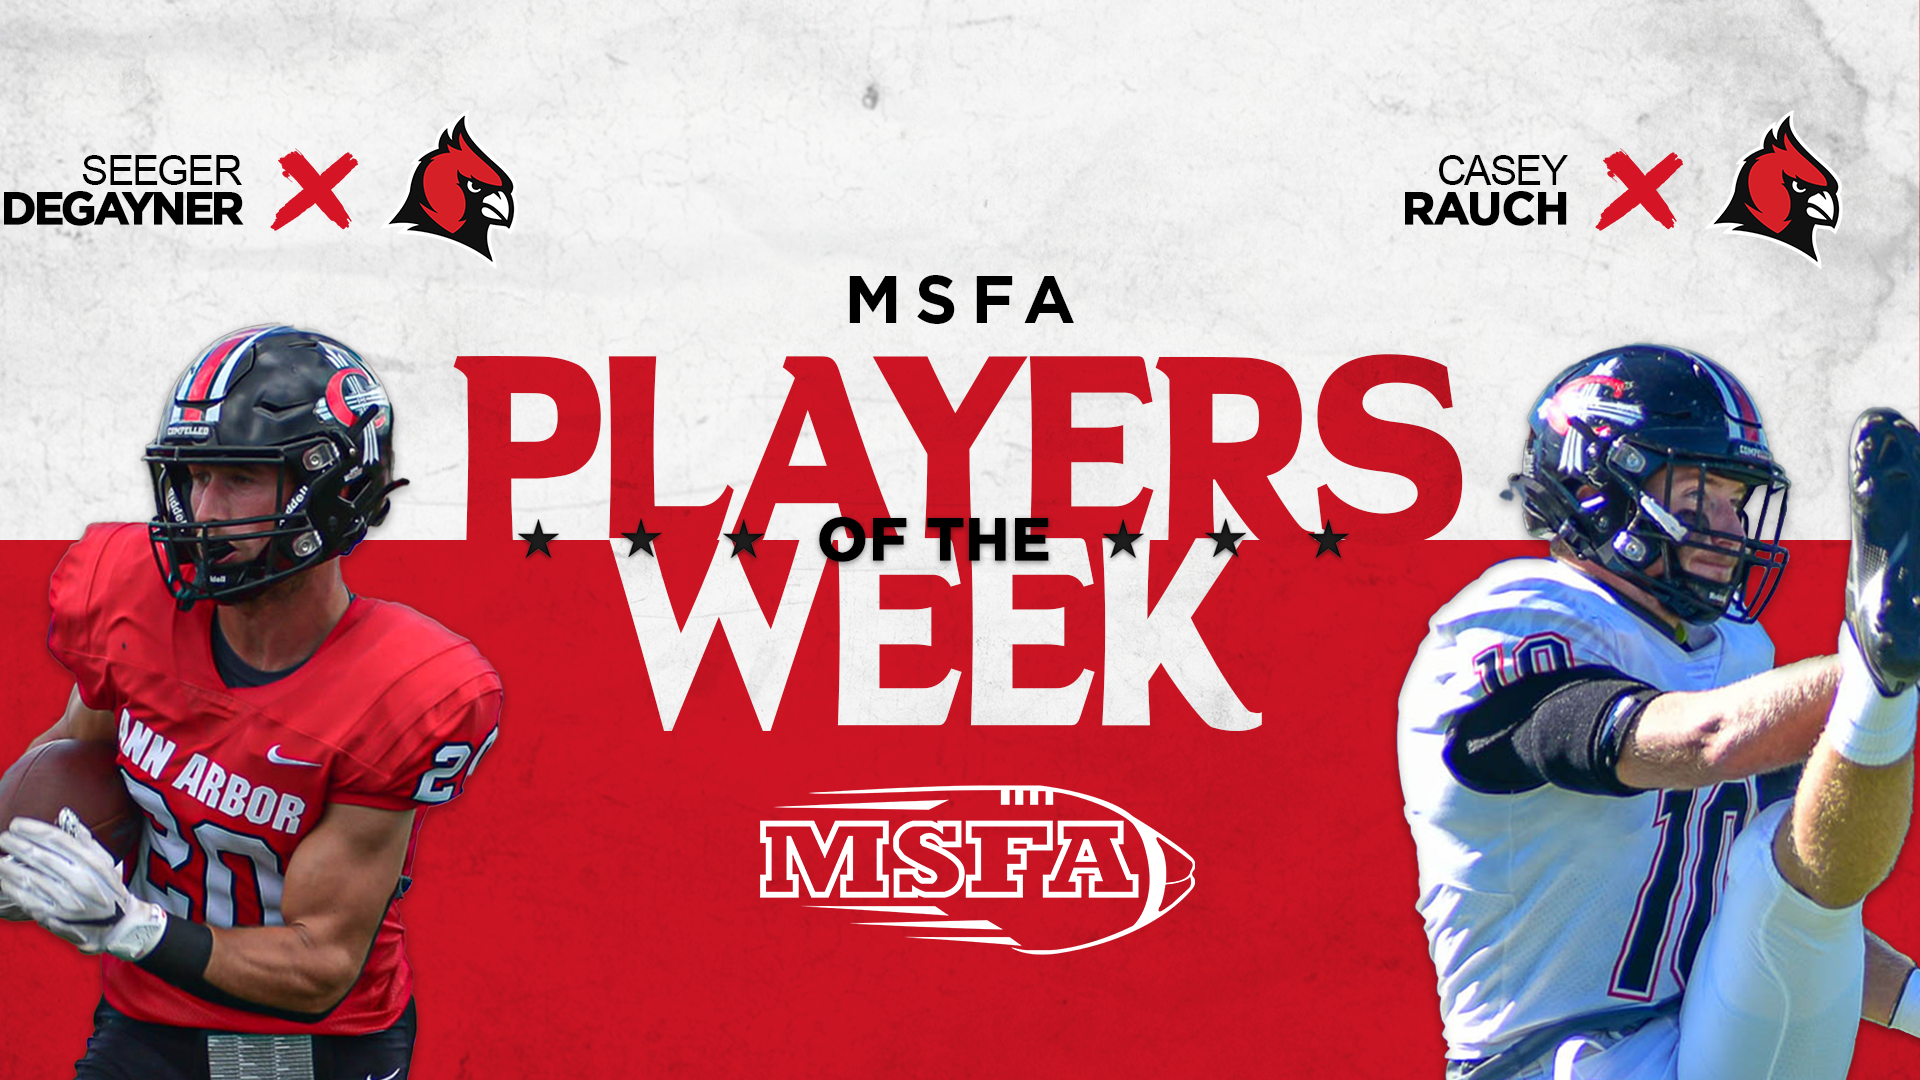 Football's DeGayner and Rauch earn MSFA Player of the Week honors